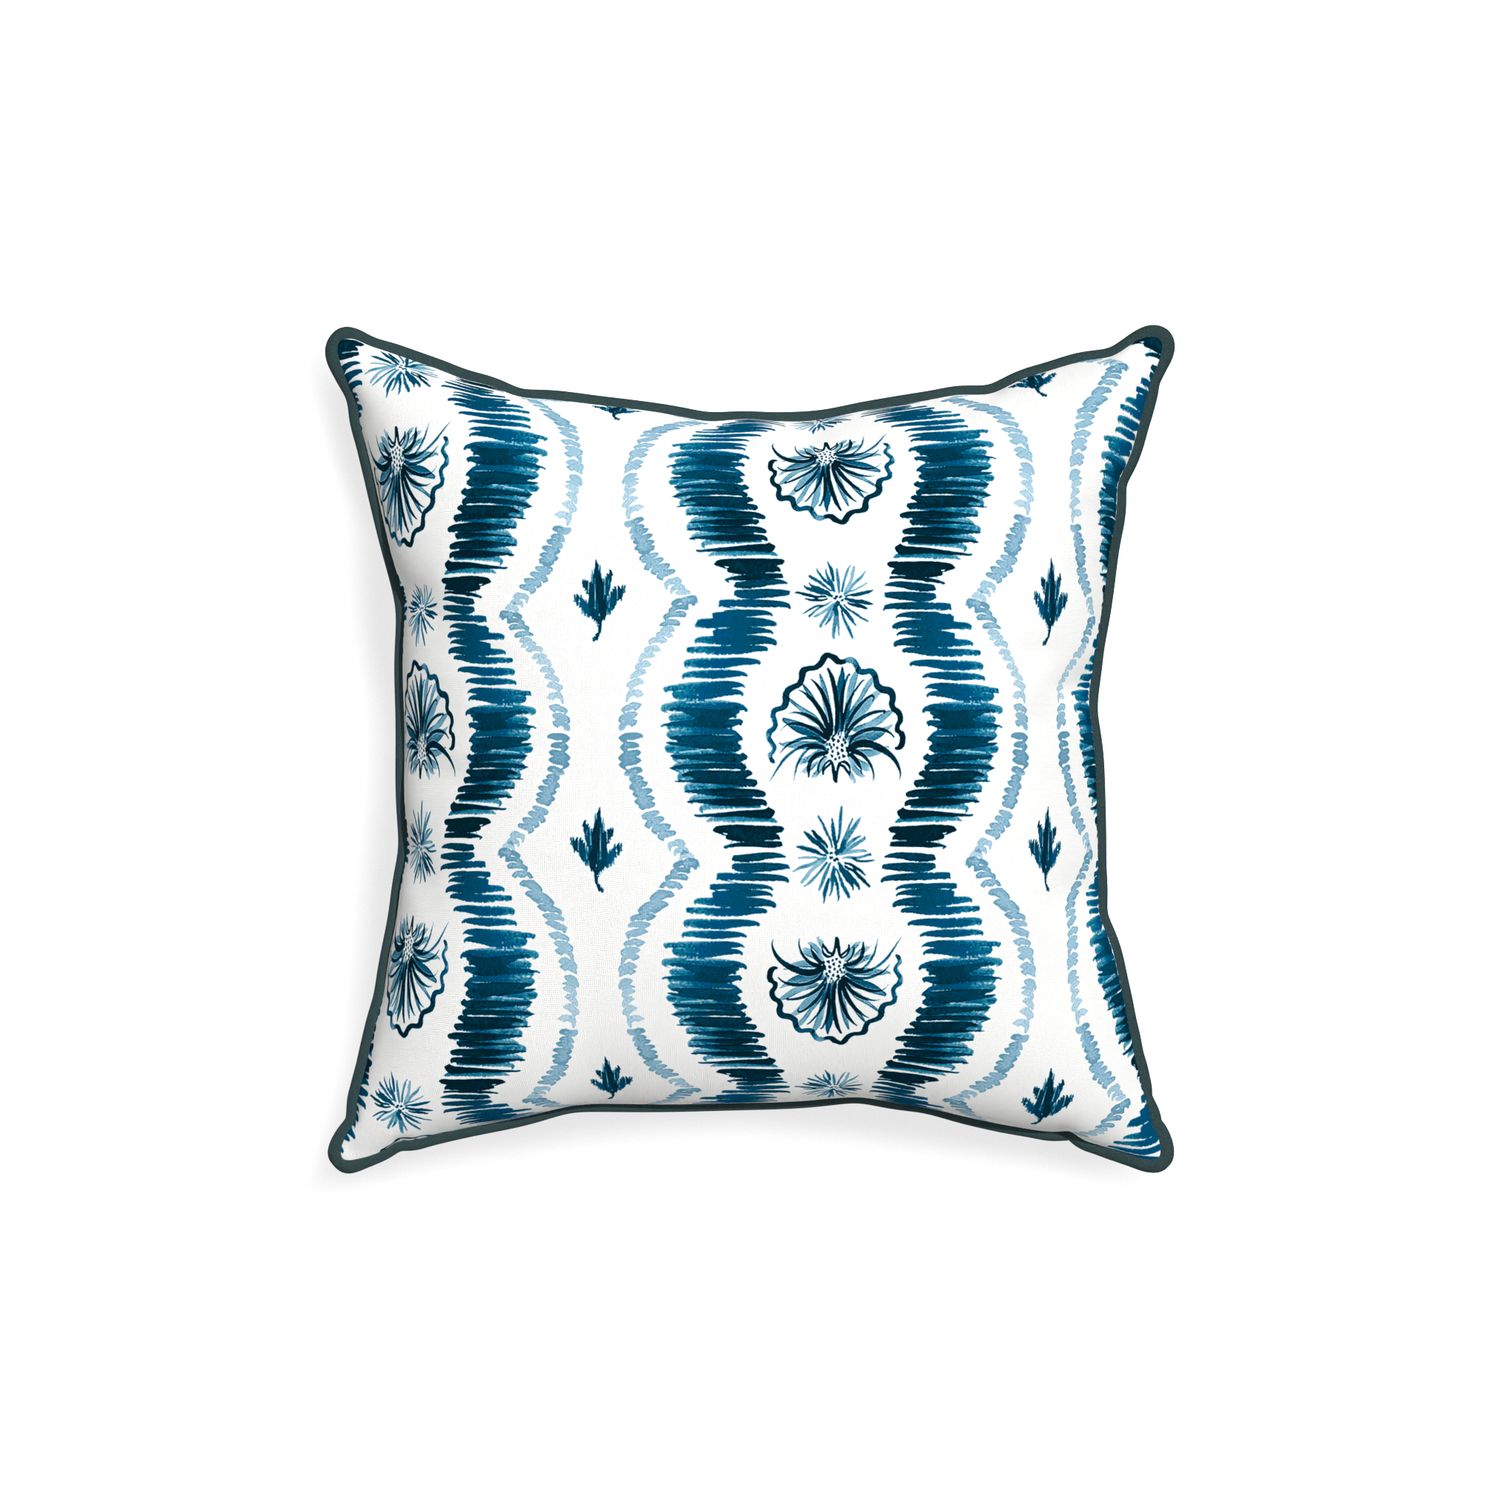 18-square alice custom blue ikatpillow with p piping on white background